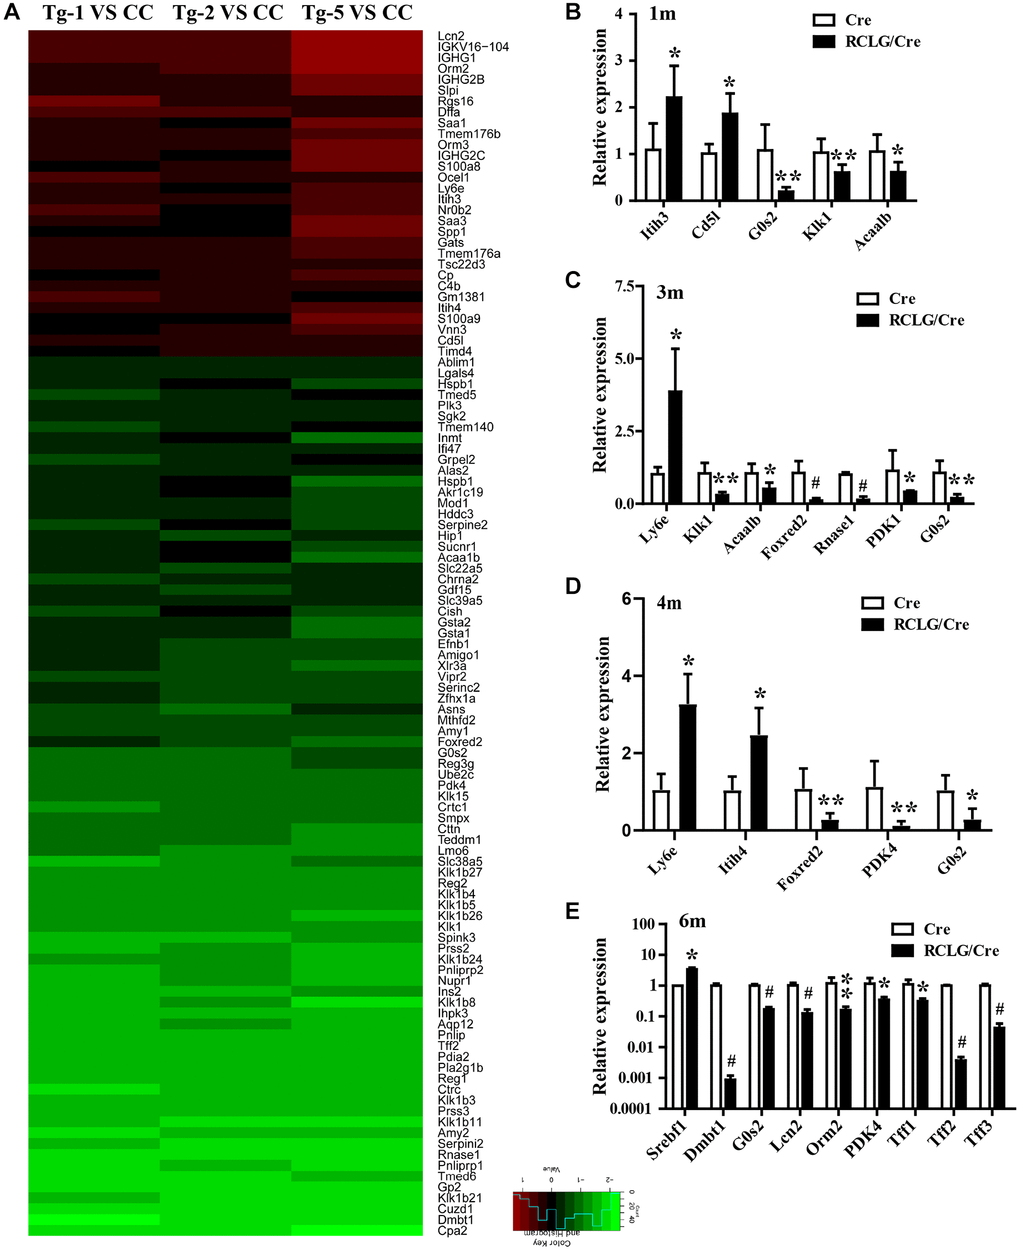 Microarray analysis reveals altered expression of HCC-related genes in the liver of RCLG/Alb-Cre mice. (A) Class comparison and hierarchical clustering of differentially expressed hepatocarcinogenesis-related genes in the livers of RCLG/Alb-Cre and Alb-Cre mice. Tg-1, Tg-2, and Tg-5 represent total RNA from the livers of three 4-month-old RCLG/Alb-Cre transgenic mice; CC represents pooled total RNA isolated from the livers of three 4-month-old Alb-Cre control littermates. Equal amounts of total RNA from the livers of each control mice were pooled to prepare CC; Tg-1, Tg-2 or Tg-5 vs. CC: Tg-1, Tg-2, or Tg-5 compared to pooled CC; Only genes showing a fold change of more than 2 and a Student’s t test P value of less than 0.05 were included in the analysis. Red indicates increased expression; blue indicates reduced expression. Other details of the microarray experiment are shown as in Supplementary Figure 7. (B–E) qRT-PCR analysis shows validation of 16 differentially expressed (increased or decreased mRNA expression) HCC-related genes from the microarray data in the RCLG/Alb-Cre and Alb-Cre mouse livers.